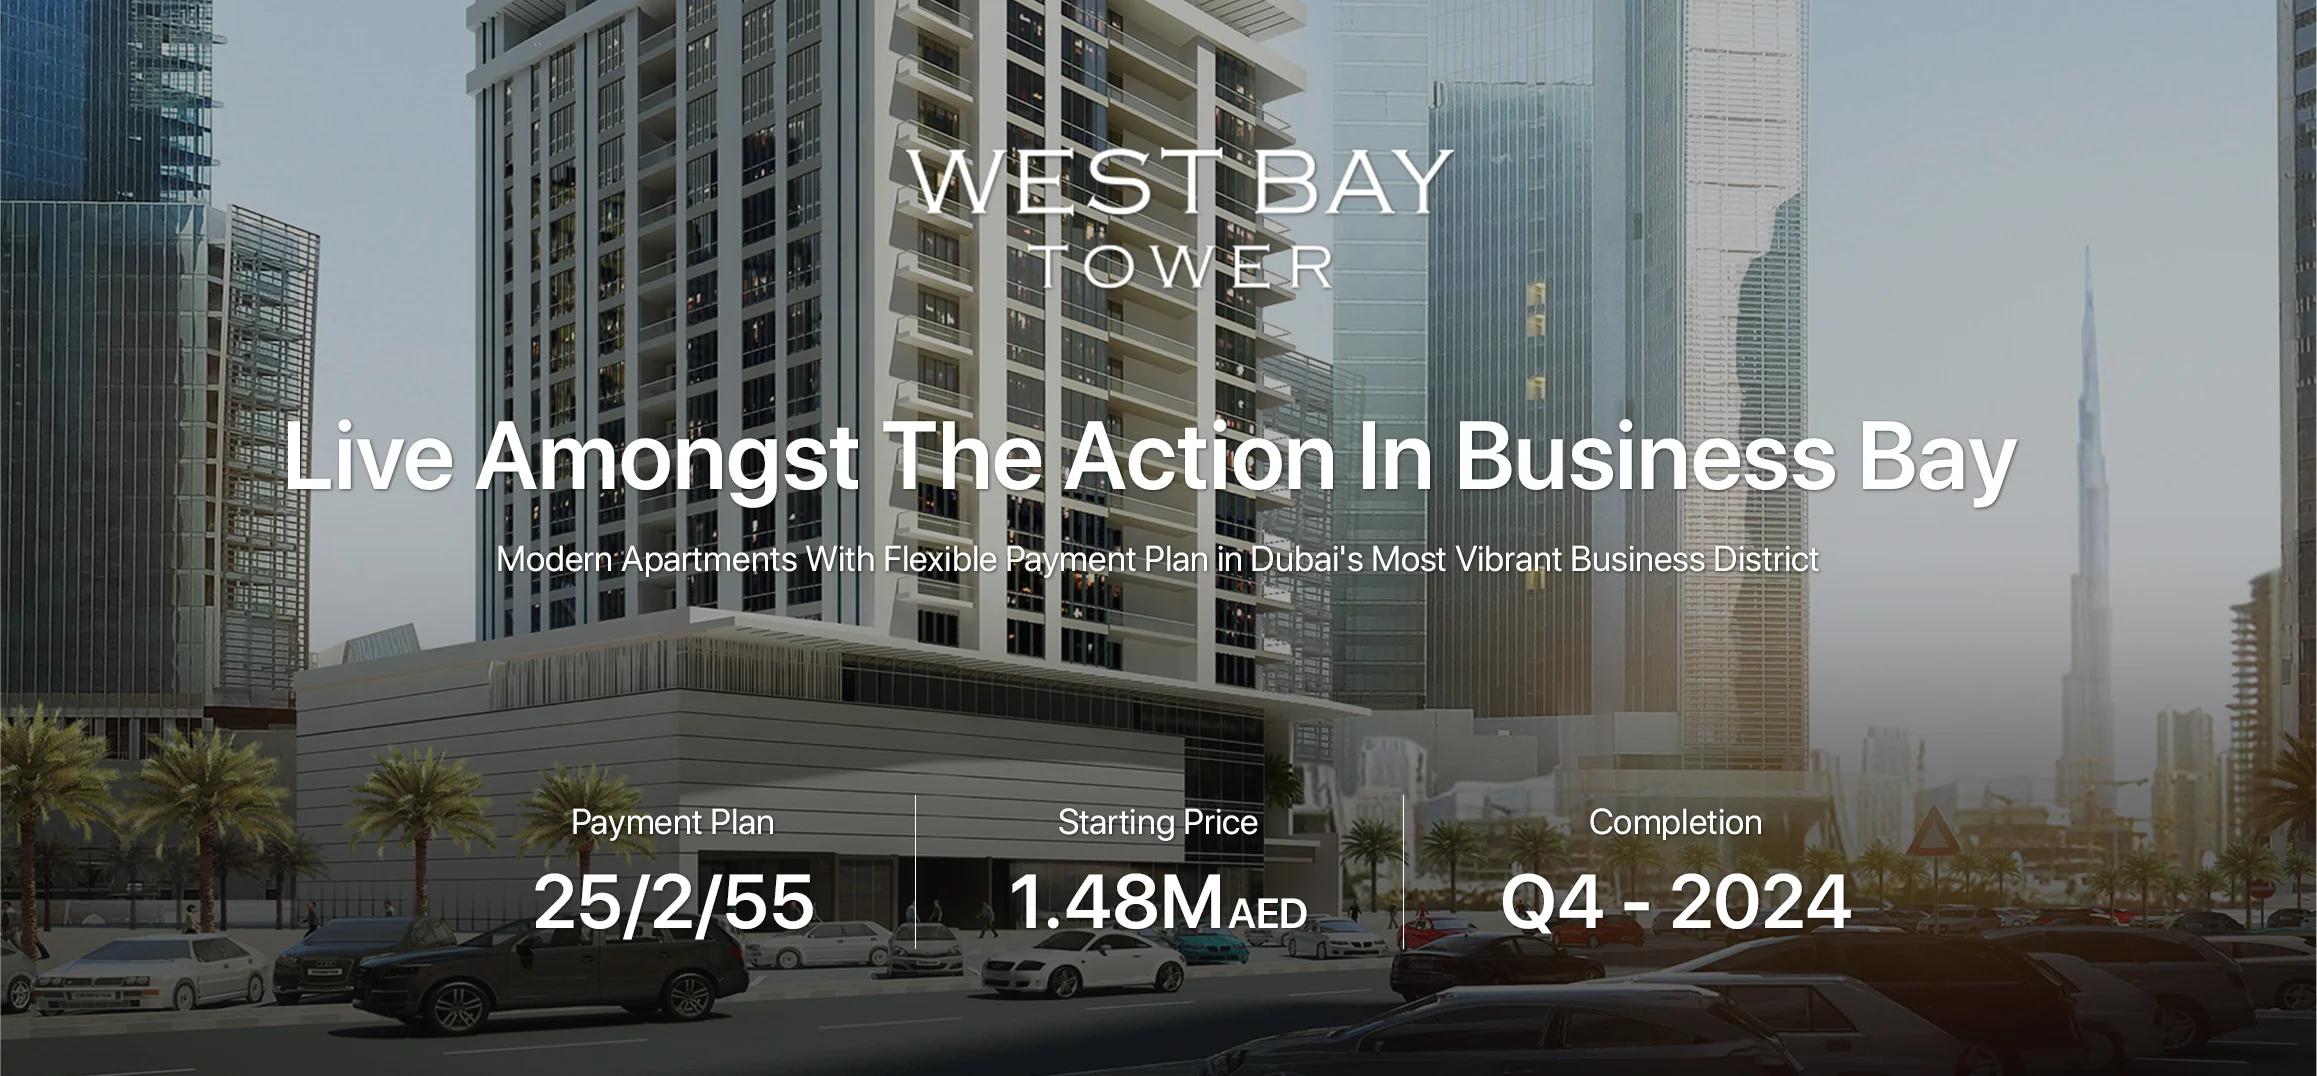 West Bay Tower, an off-plan project in Business Bay